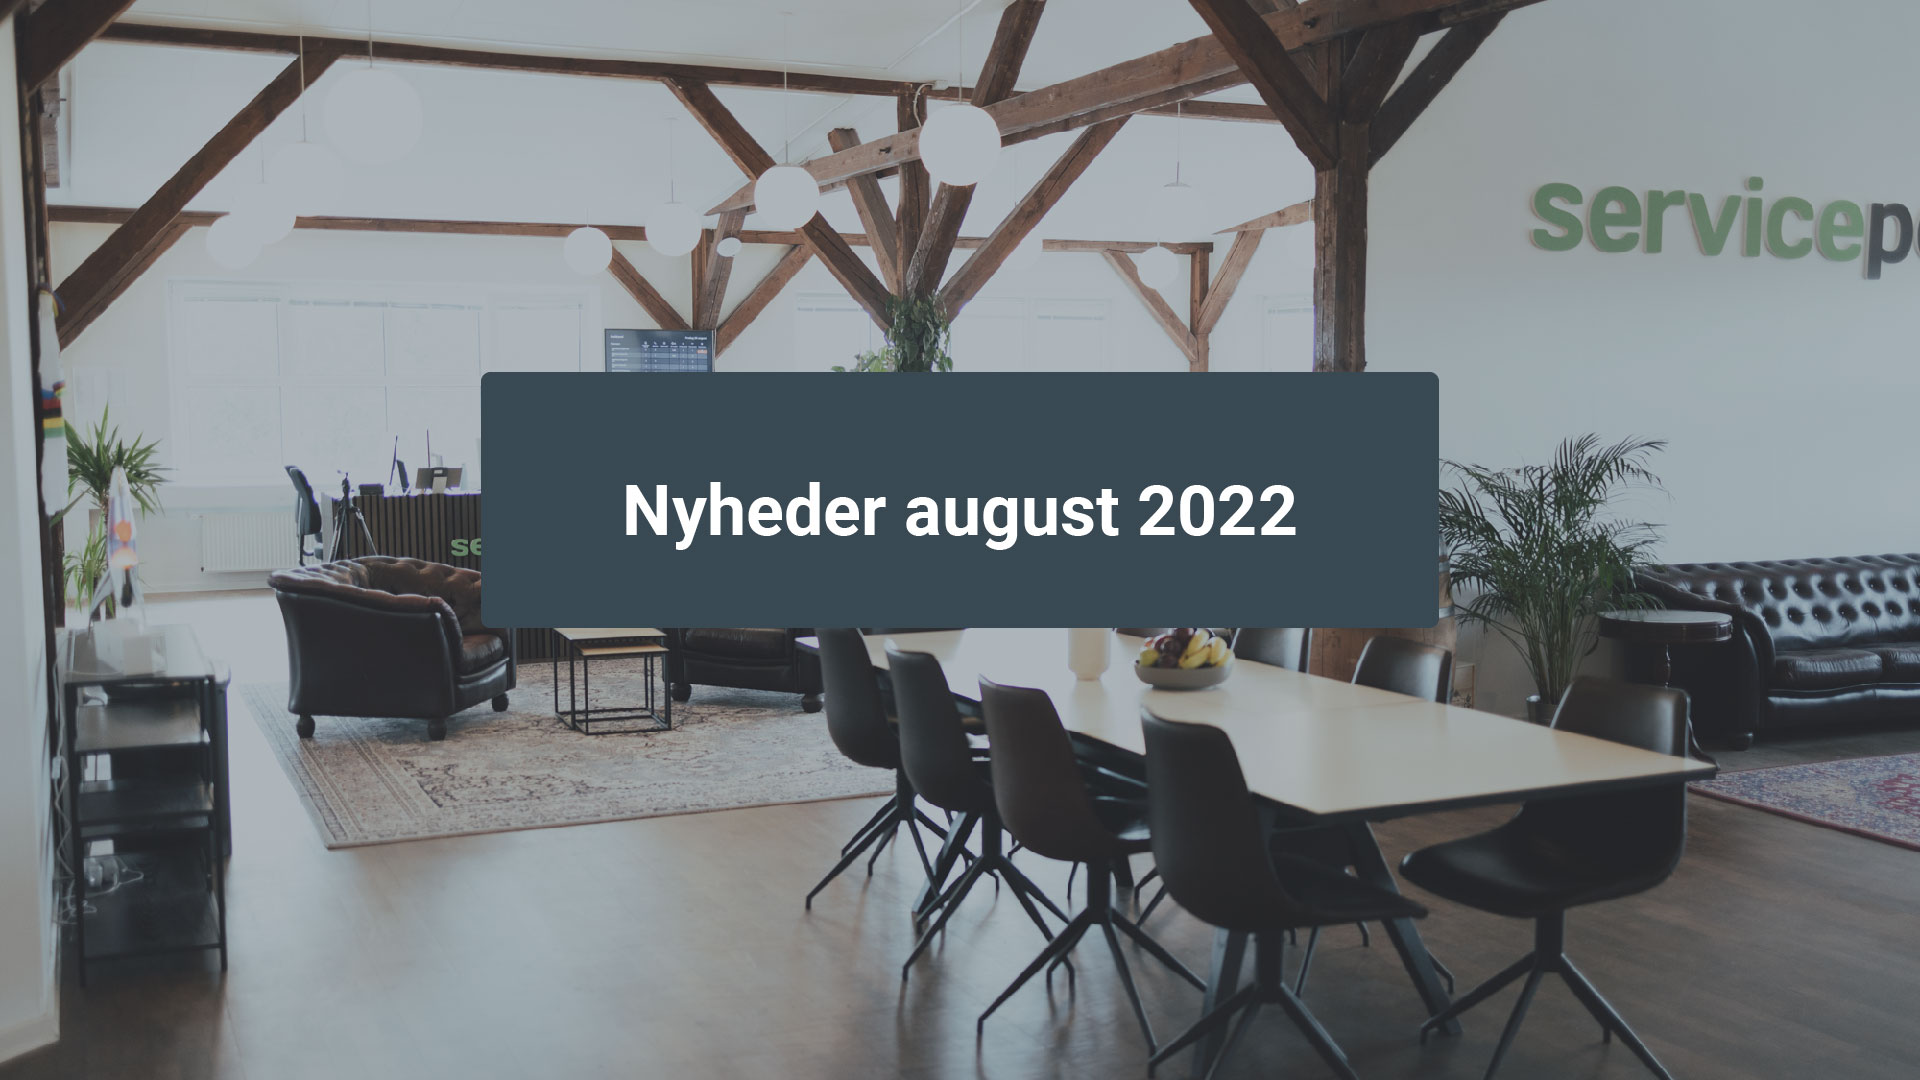 Nyheder august 22